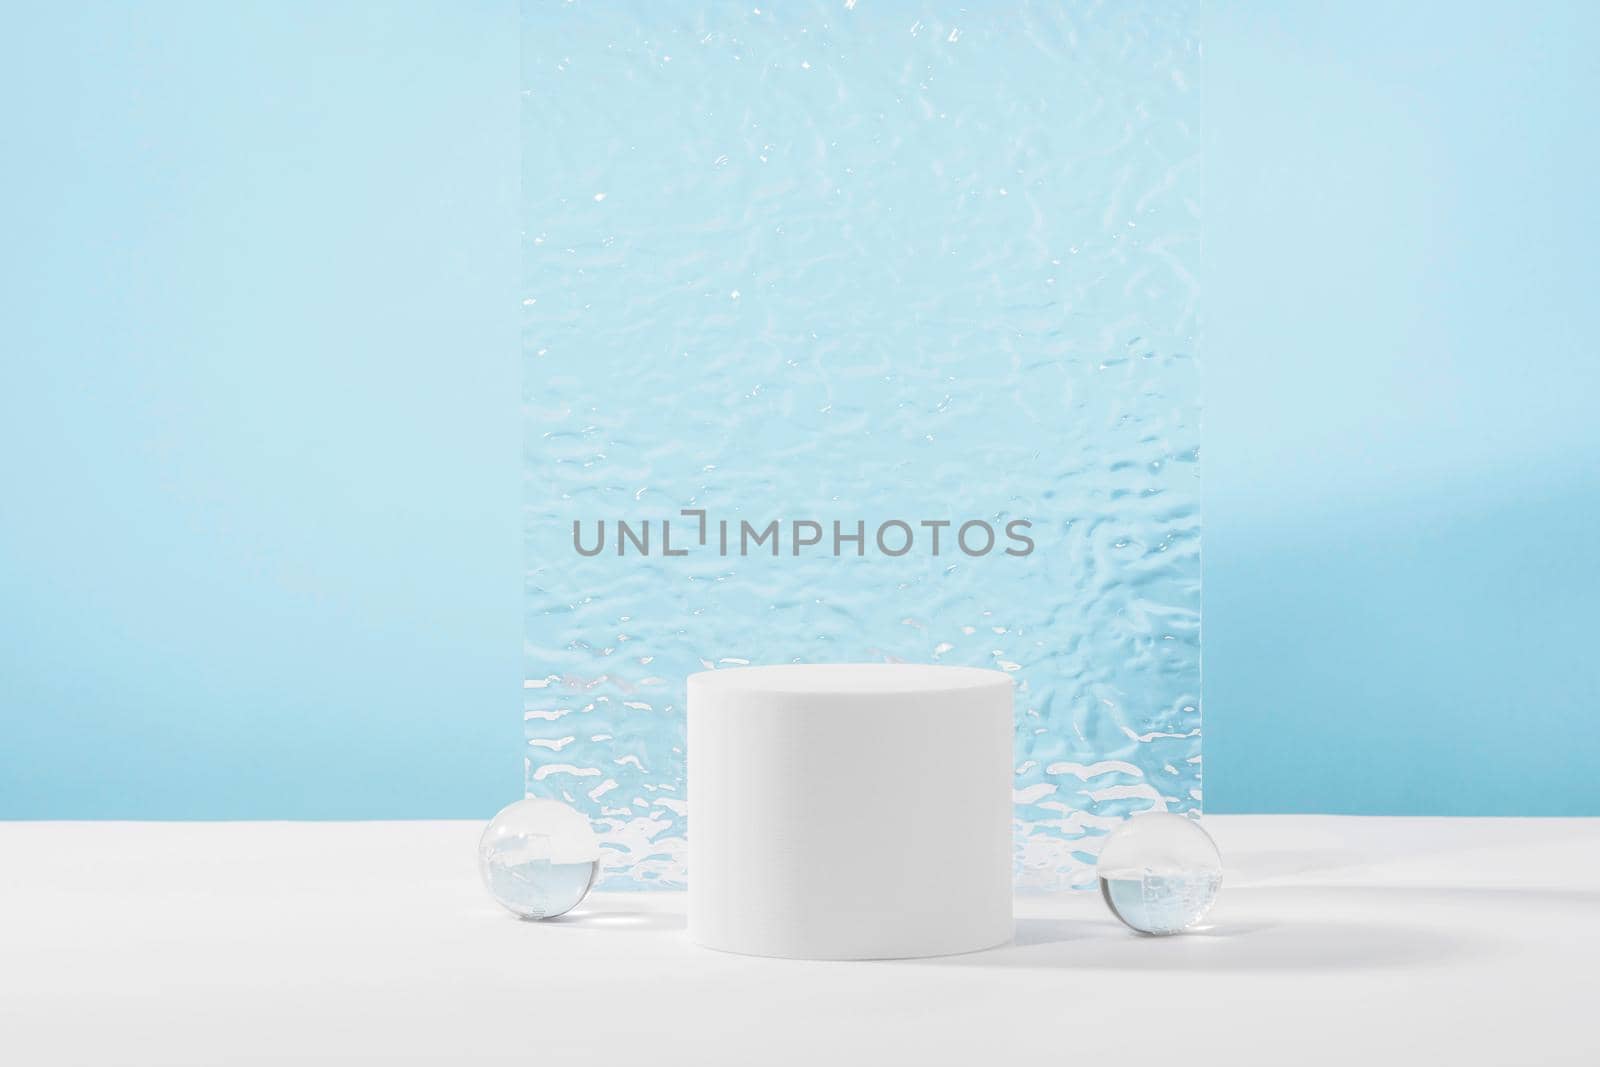 Showcase for jewellery presentation, display for advertising, cosmetics branding scene. Acrylic plate, podium, background for cosmetic product packaging on blue backdrop with stylish props. by photolime